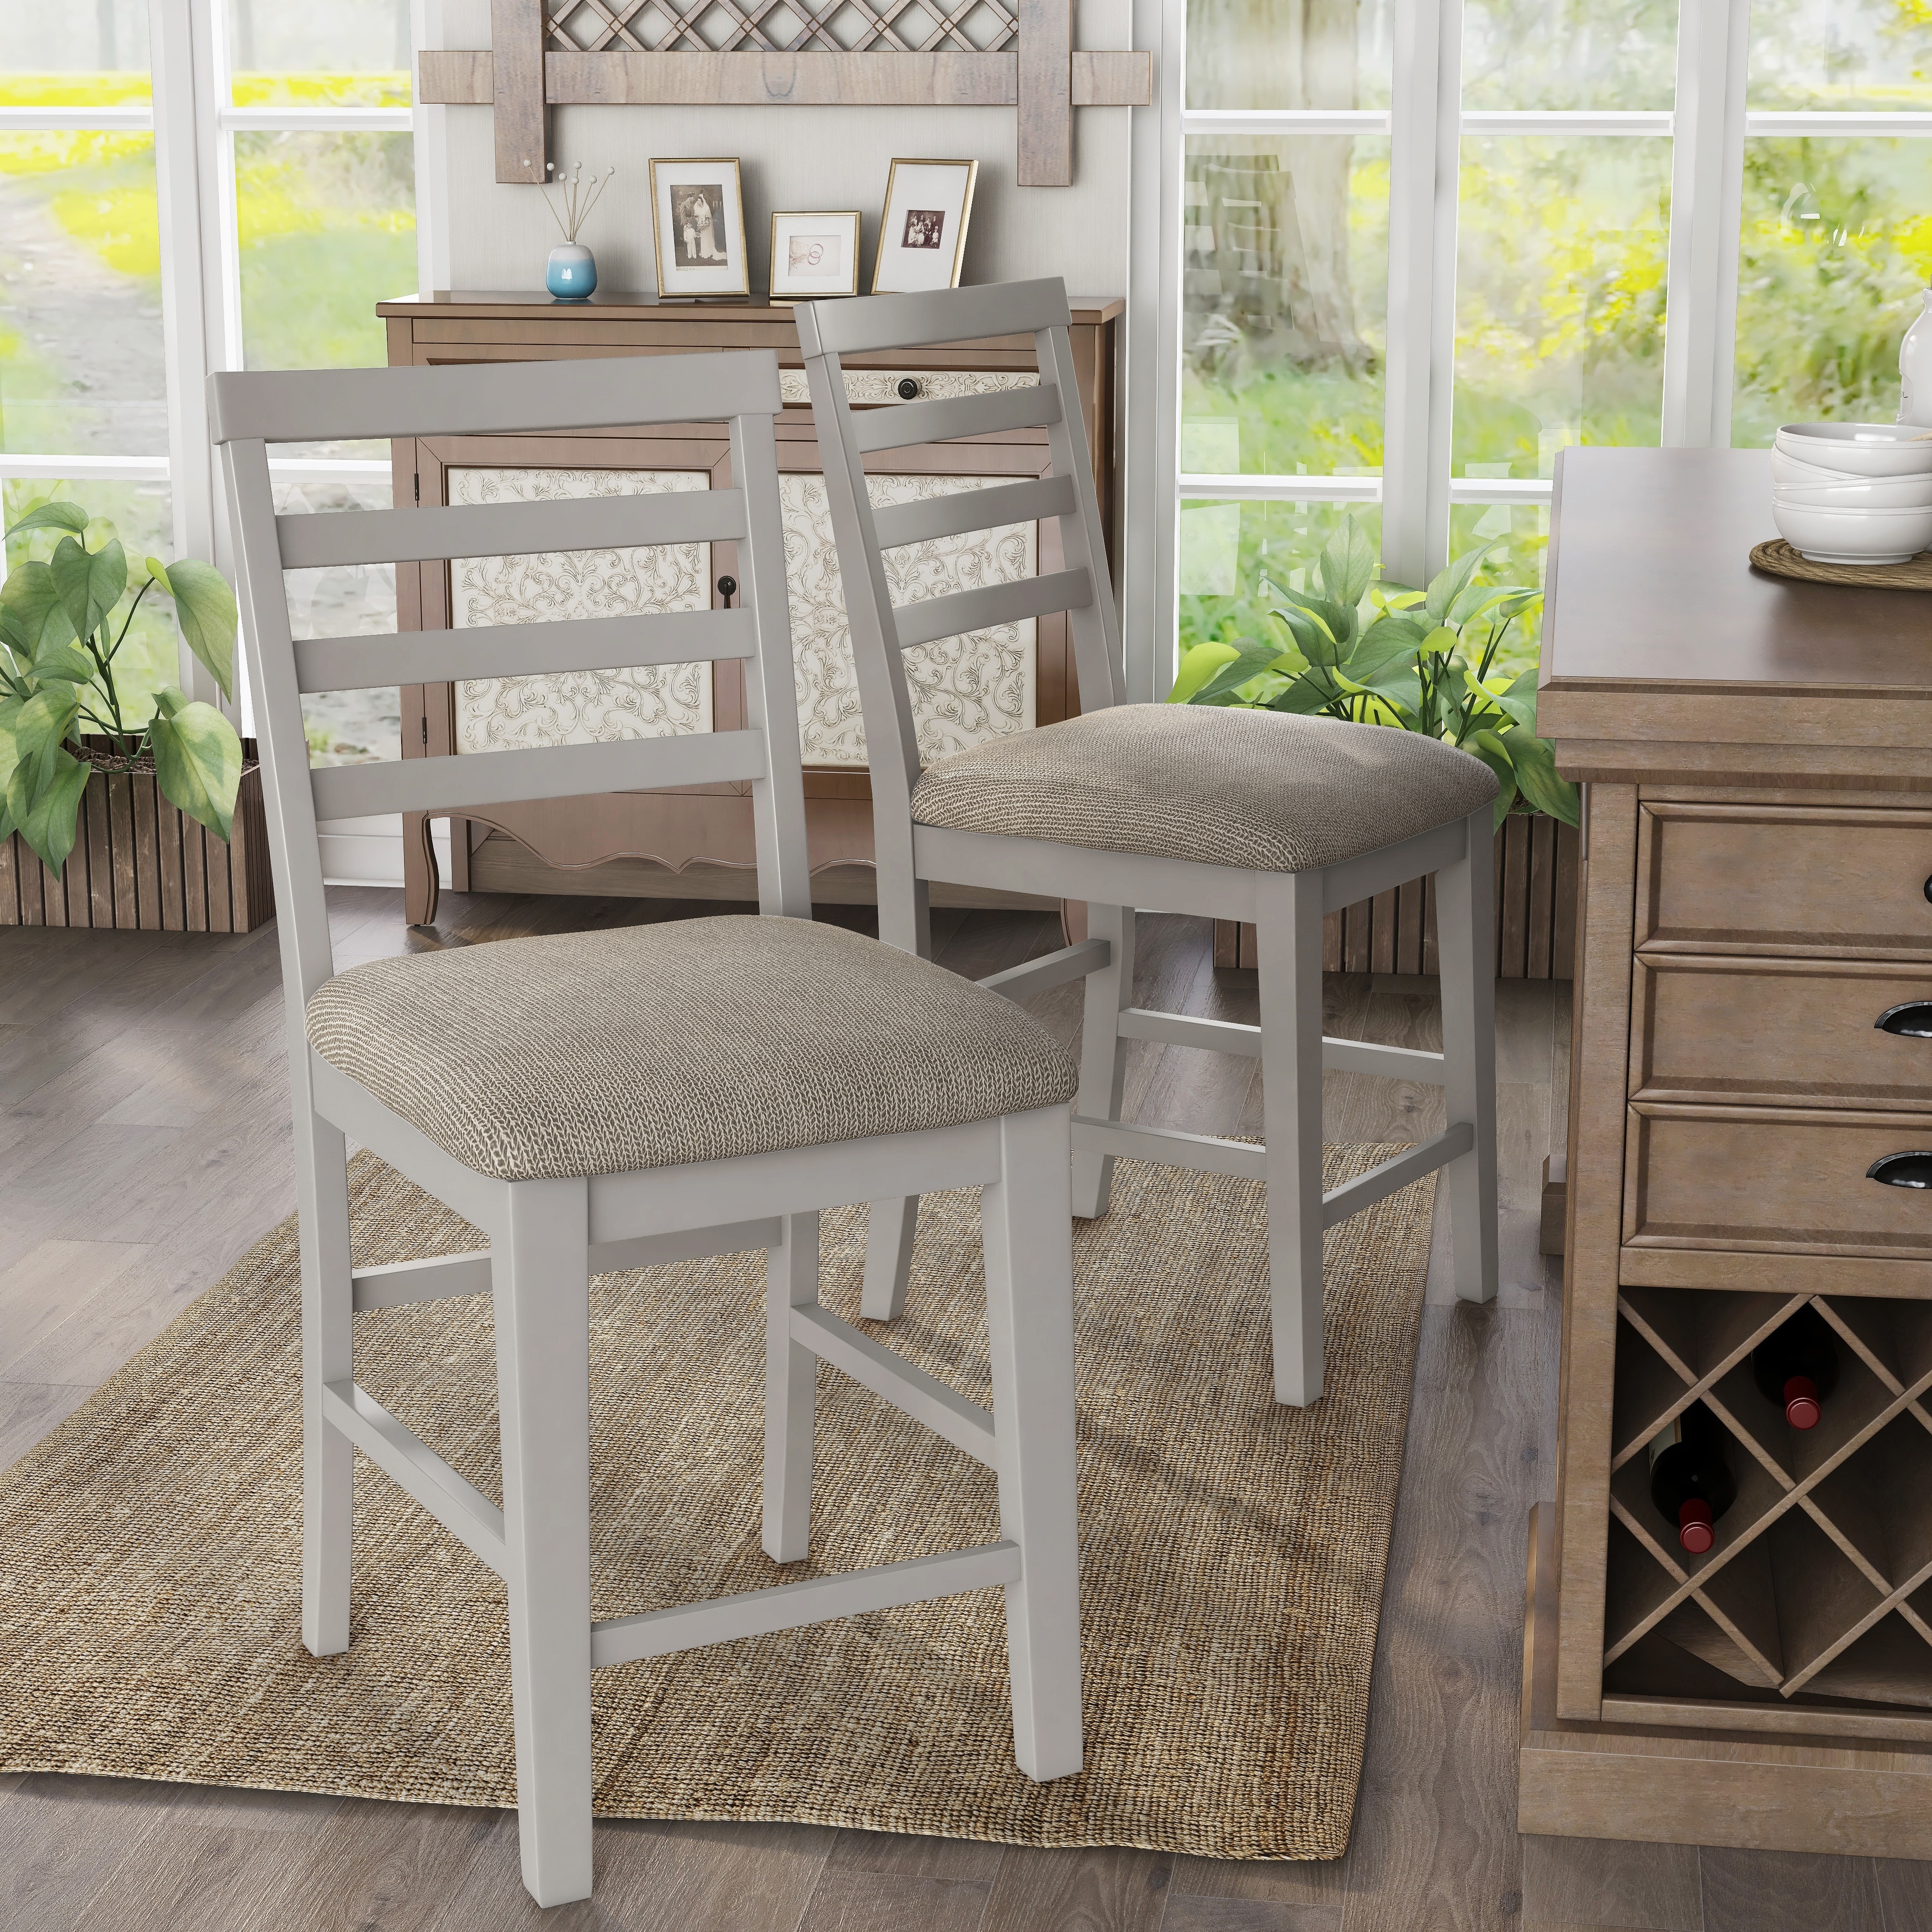 Furniture Of America Biaz Rustic White Counter Height Chairs (set Of 2)